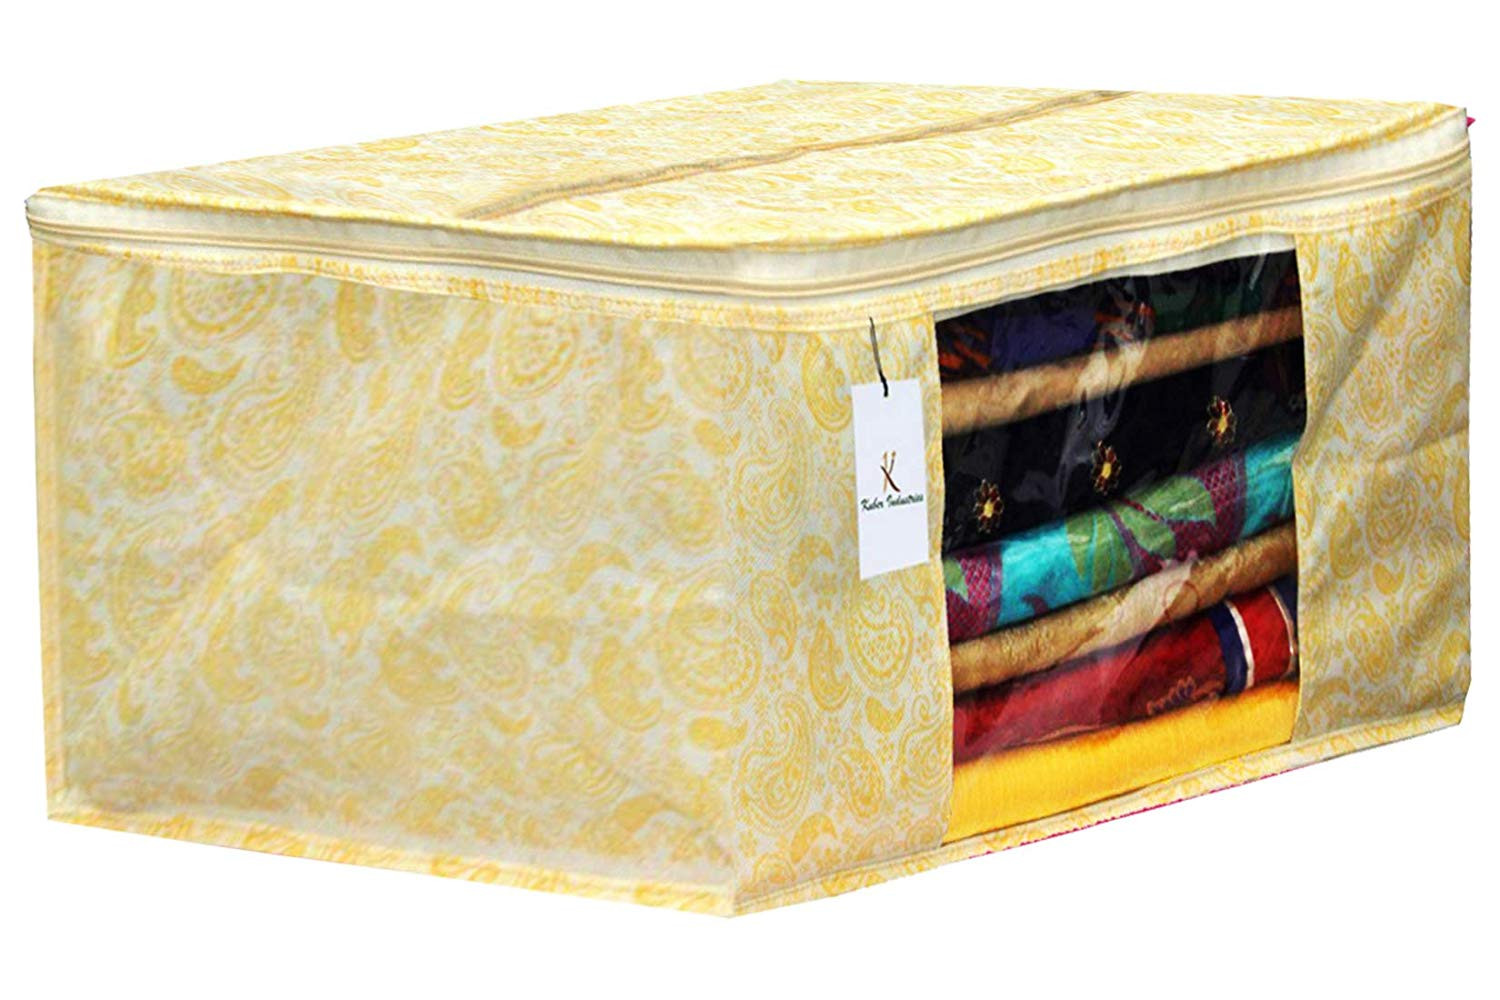 Kuber Industries Metalic Printed Non Woven Fabric Saree Cover Set with Transparent Window, Extra Large, Golden Brown & Gold -CTKTC40781